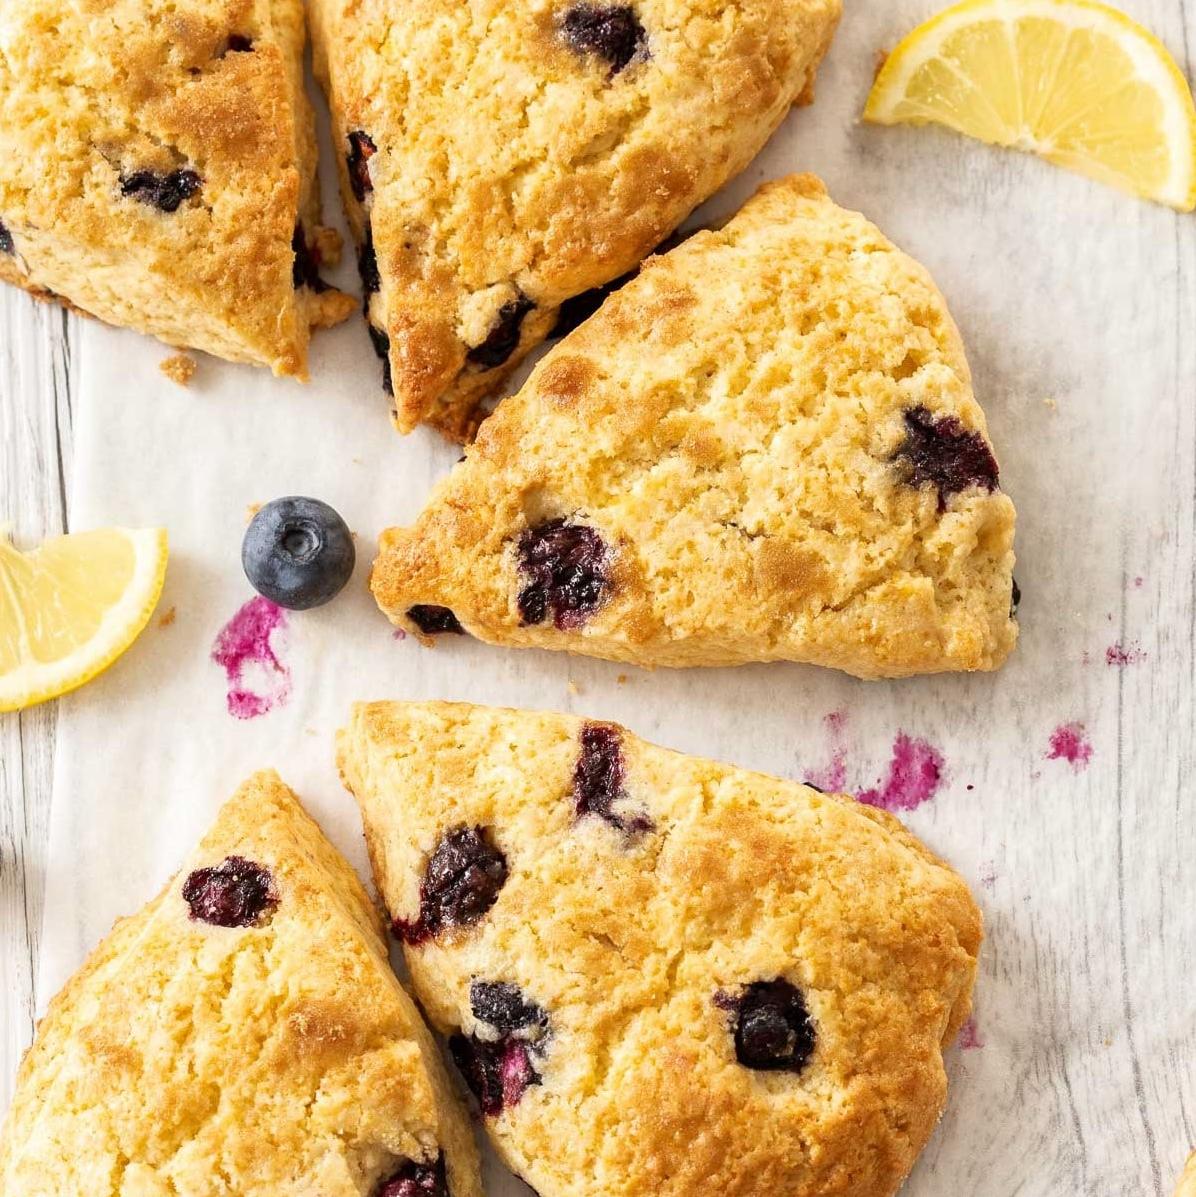  Picture yourself sitting in a cozy café in London, enjoying one of these scones.